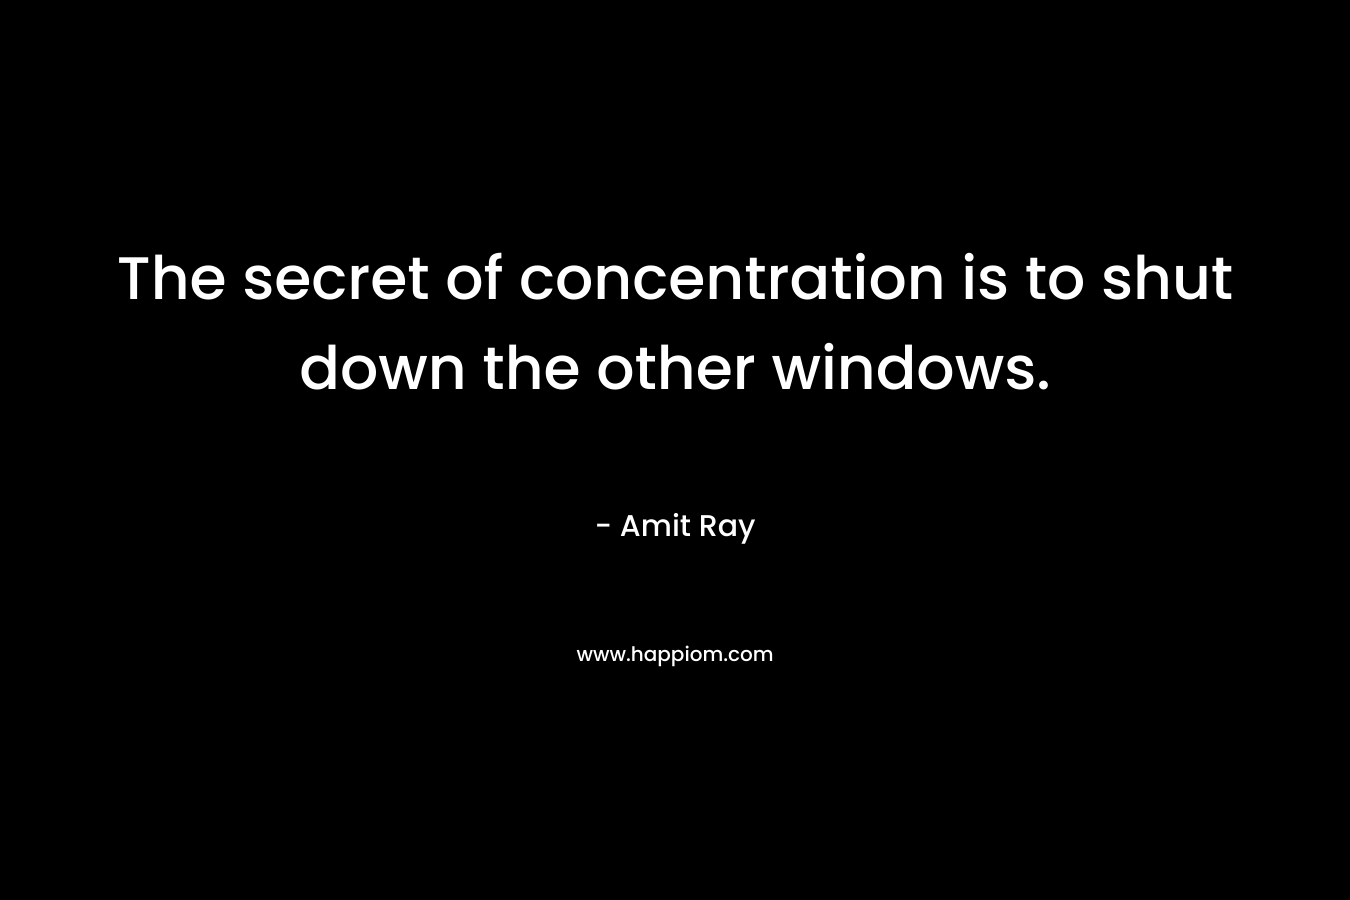 The secret of concentration is to shut down the other windows.